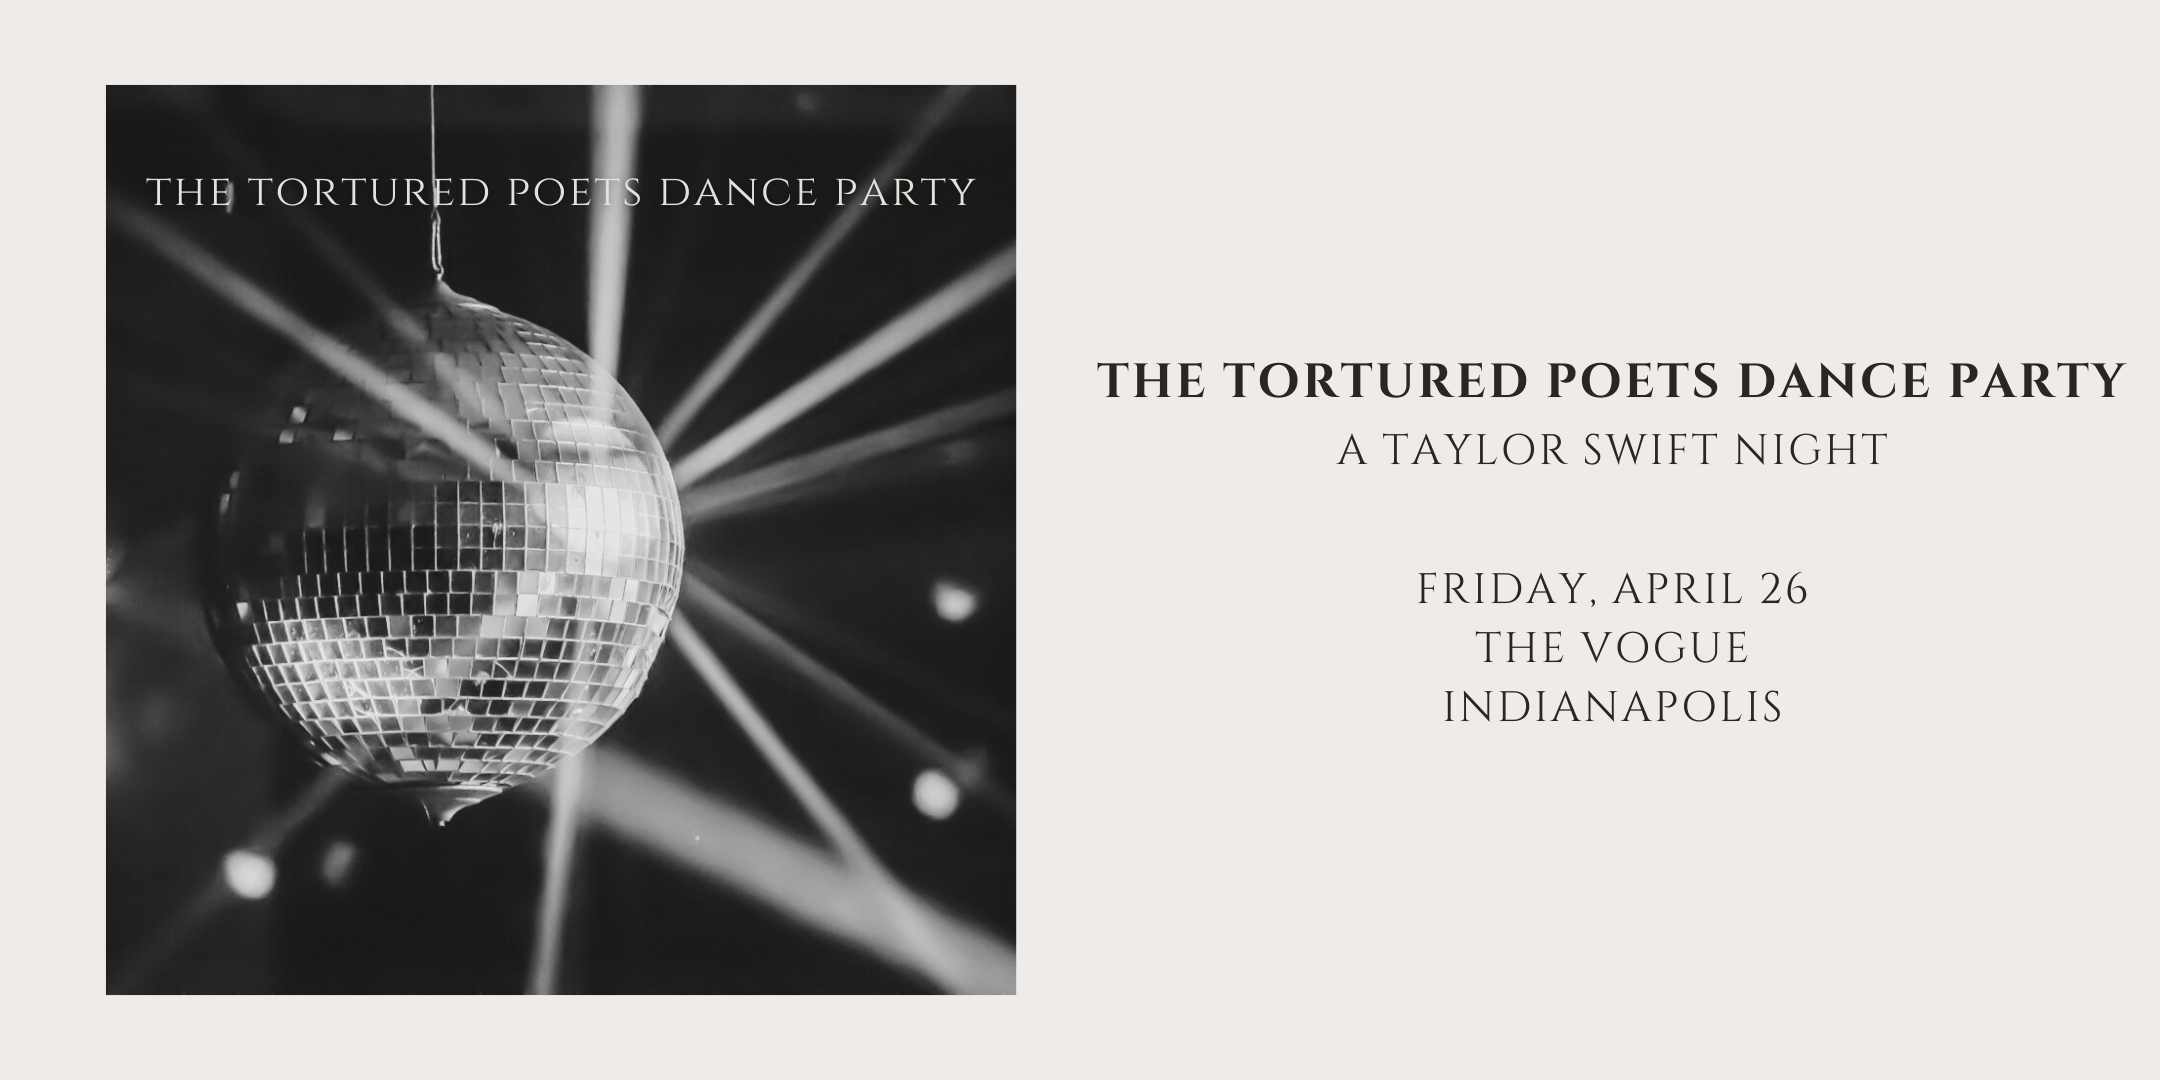 The Tortured Poets Dance Party: A Taylor Swift Night